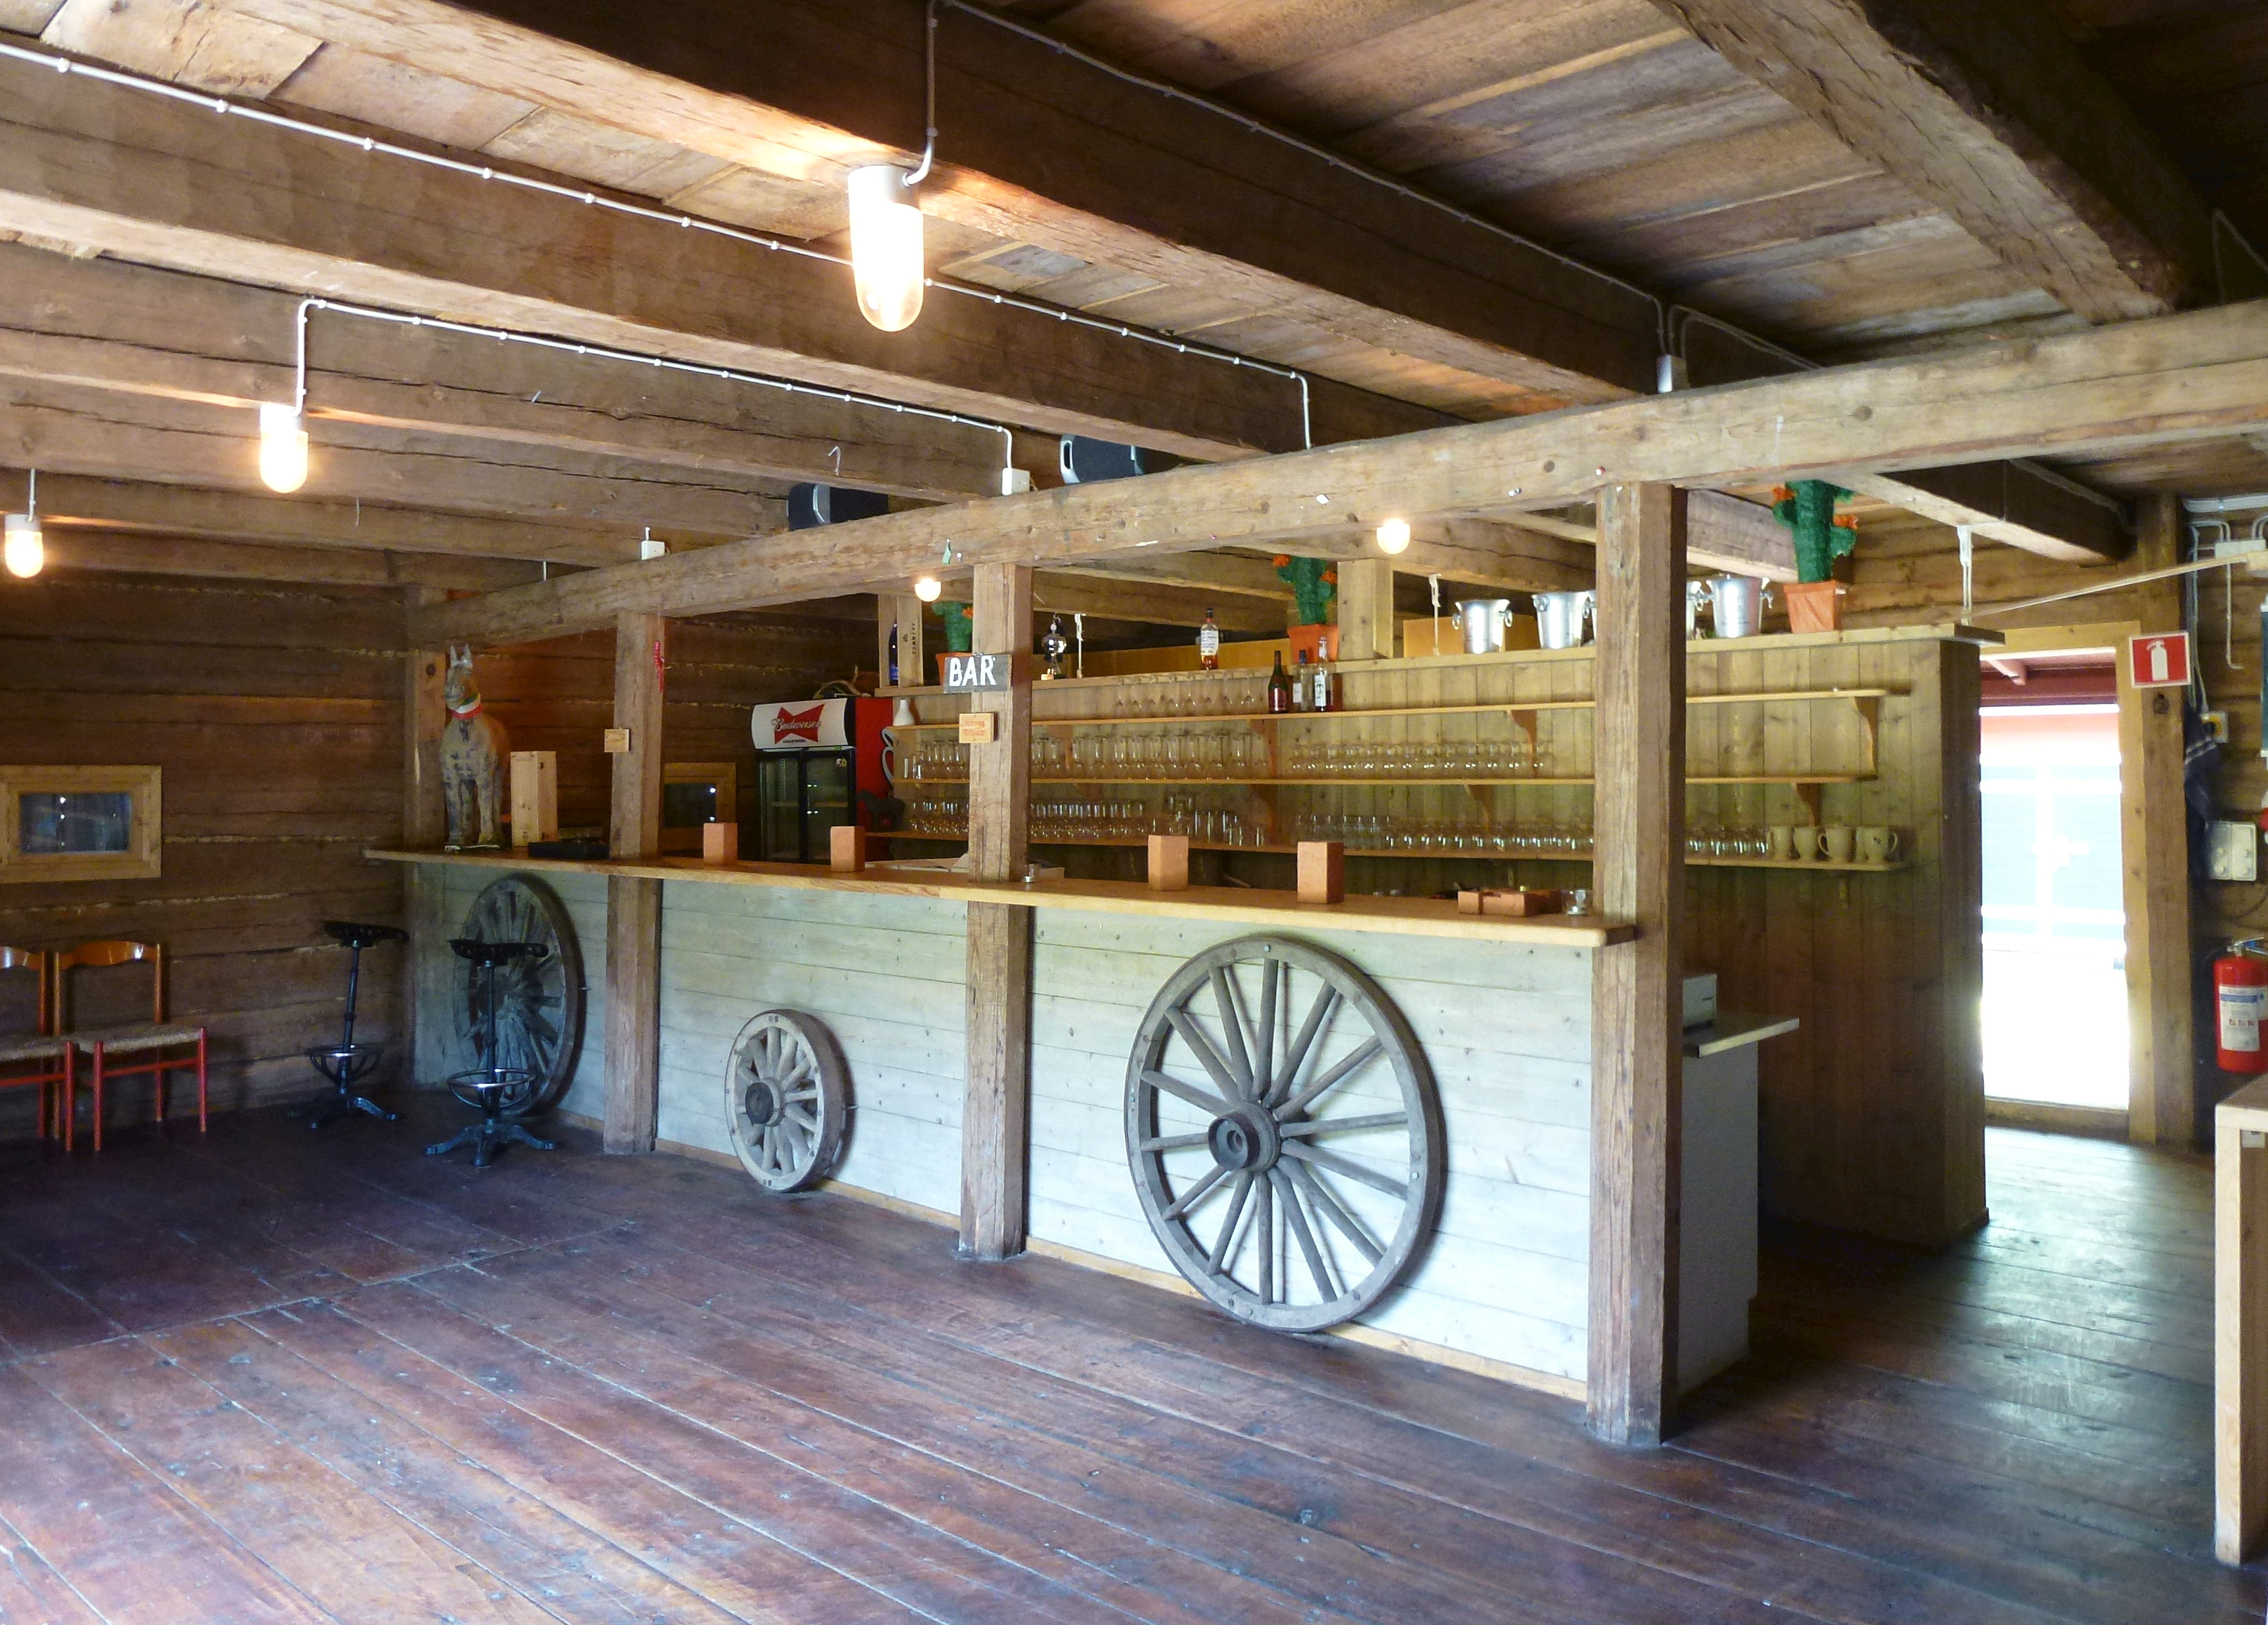 Rustic bar shed